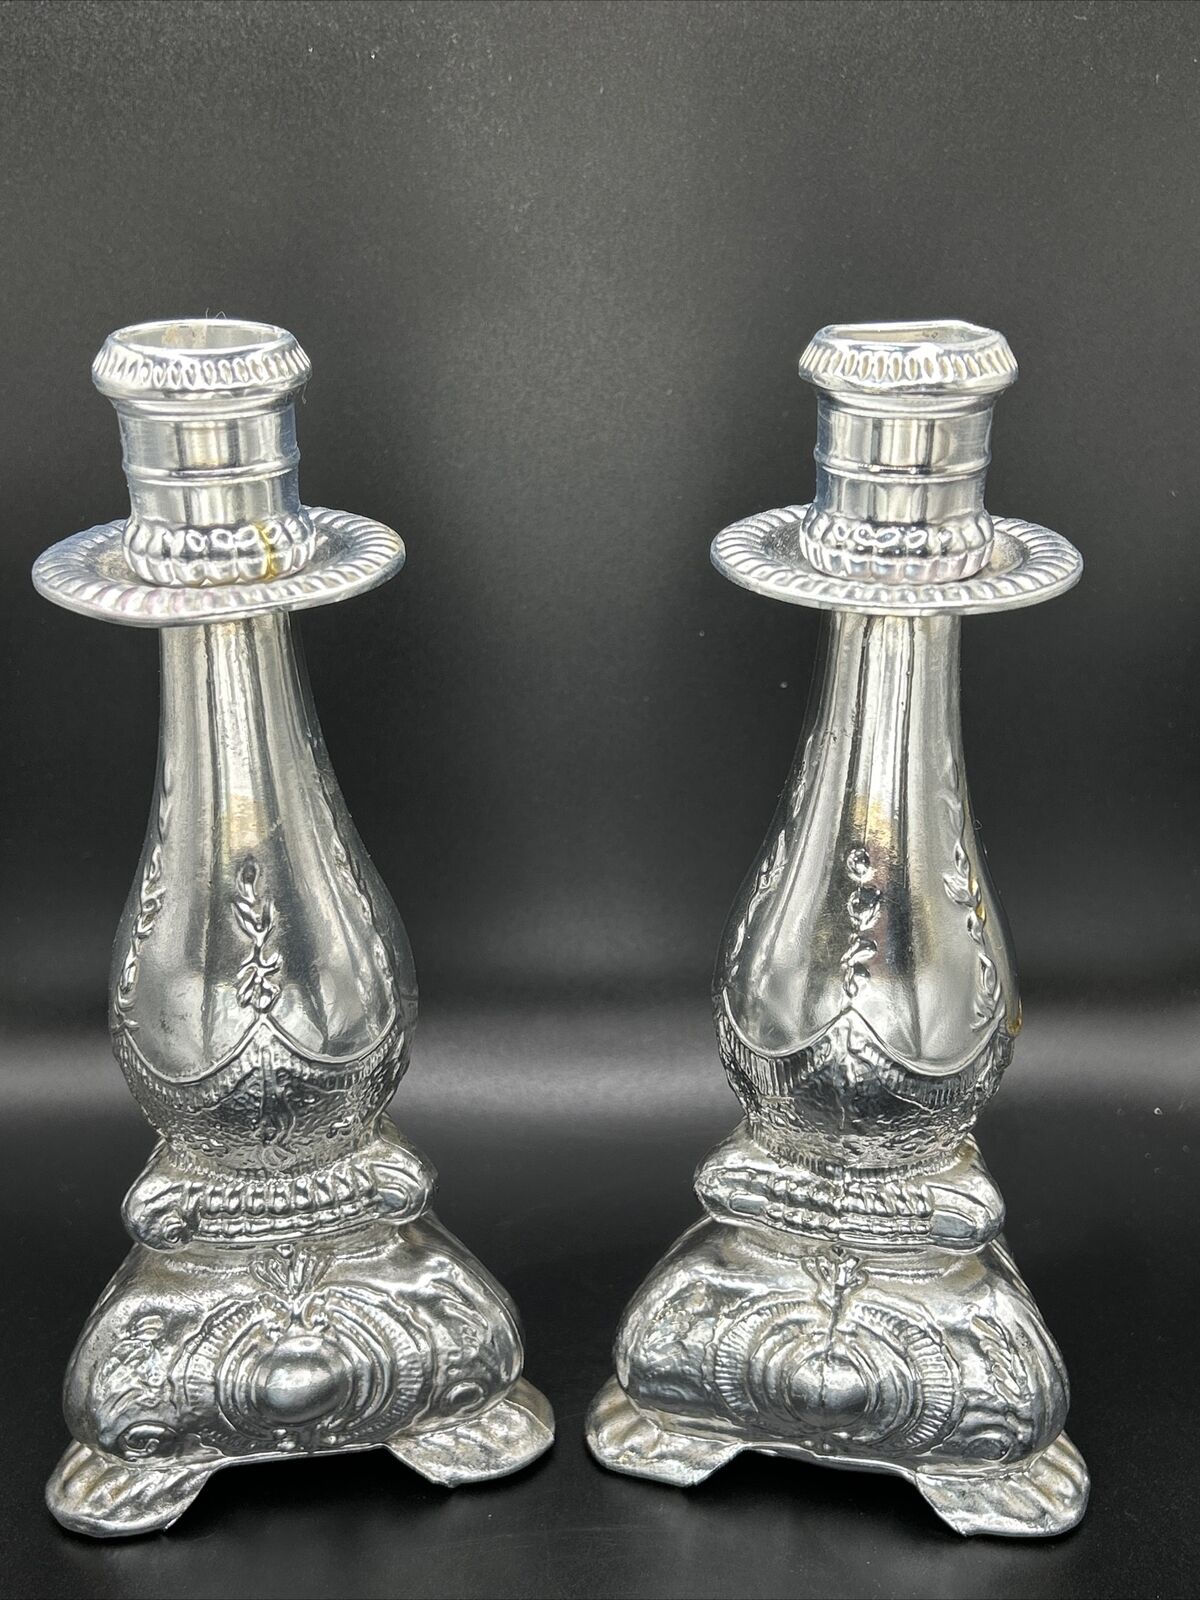 Avon Candlestick Moonwind Cologne 5oz  Bottles Vintage Some Cologne In Each 1972